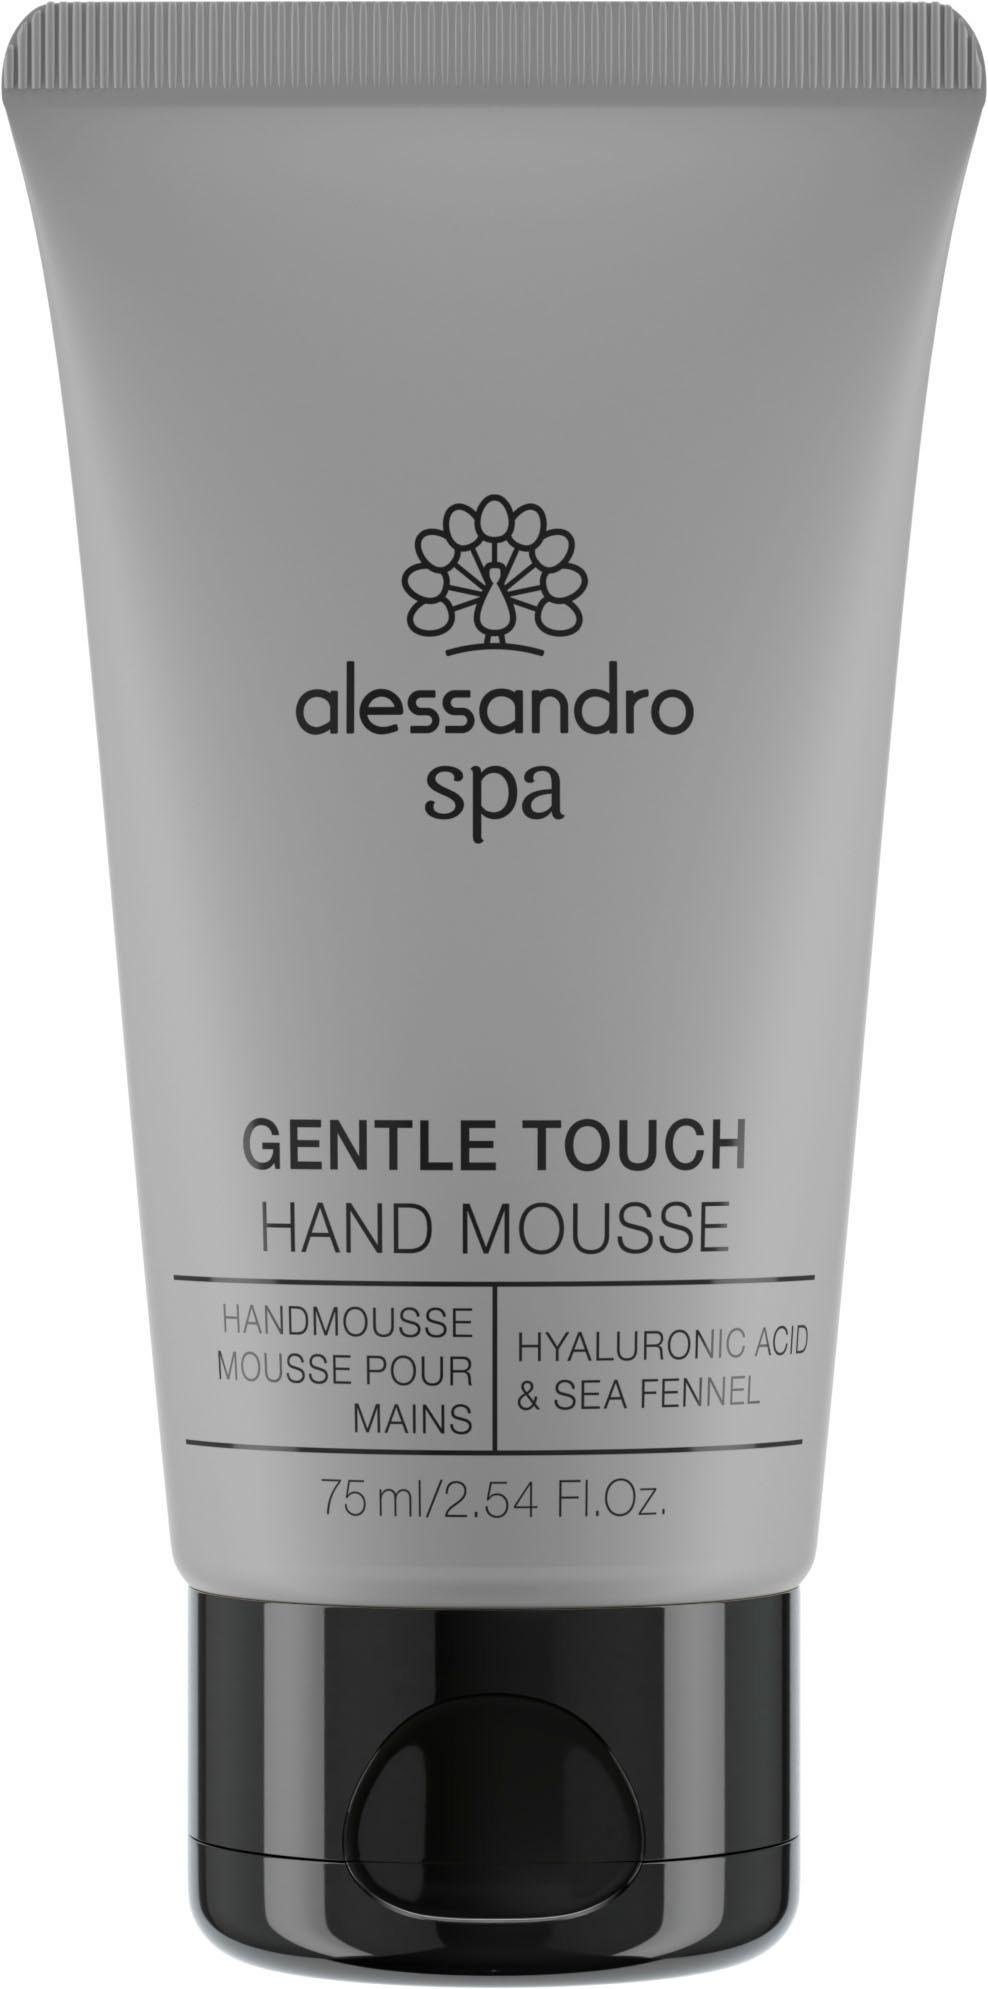 international Handmousse GENTLE TOUCH alessandro SPA